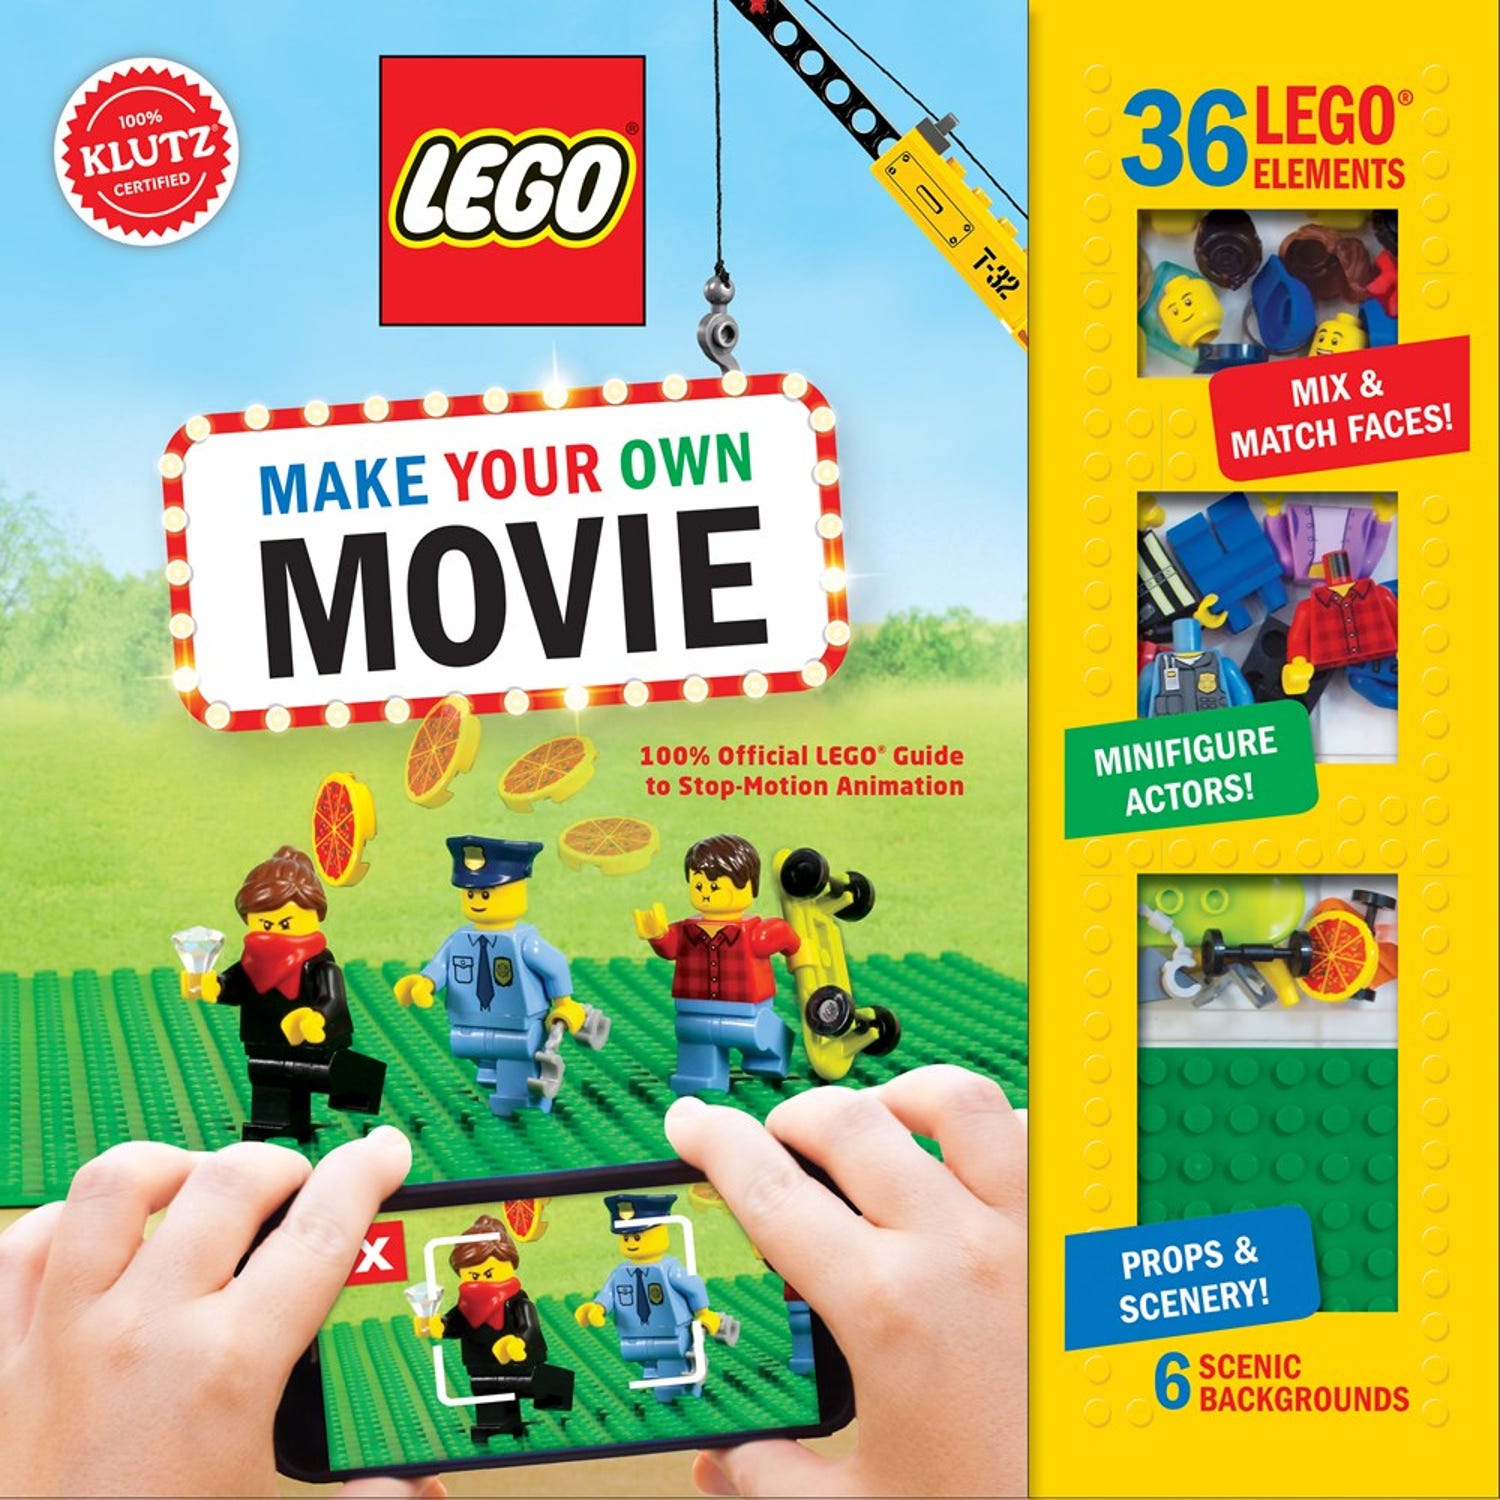 Tung lastbil by Tegne forsikring LEGO® Make Your Own Movie: 100% Official LEGO Guide to Stop-Motion Animation  5006824 | Other | Buy online at the Official LEGO® Shop US